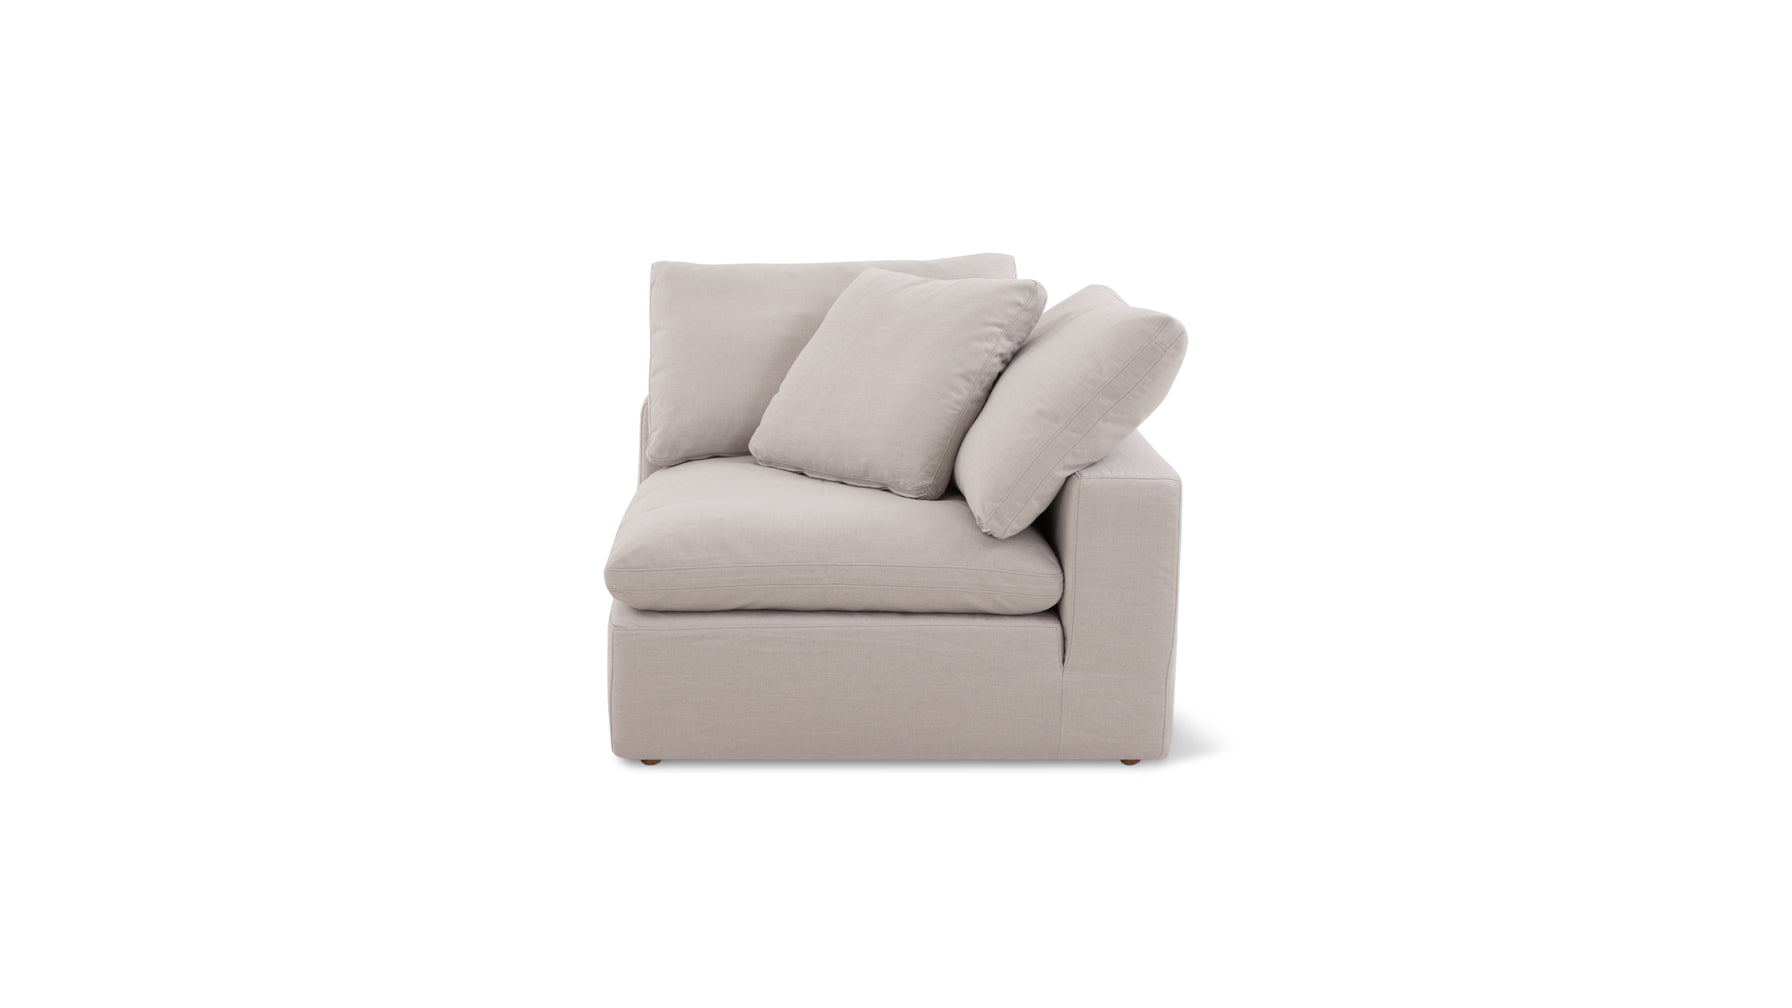 Slipcover - Movie Night™ Corner Chair, Large, Clay (Left Or Right) - Image 1